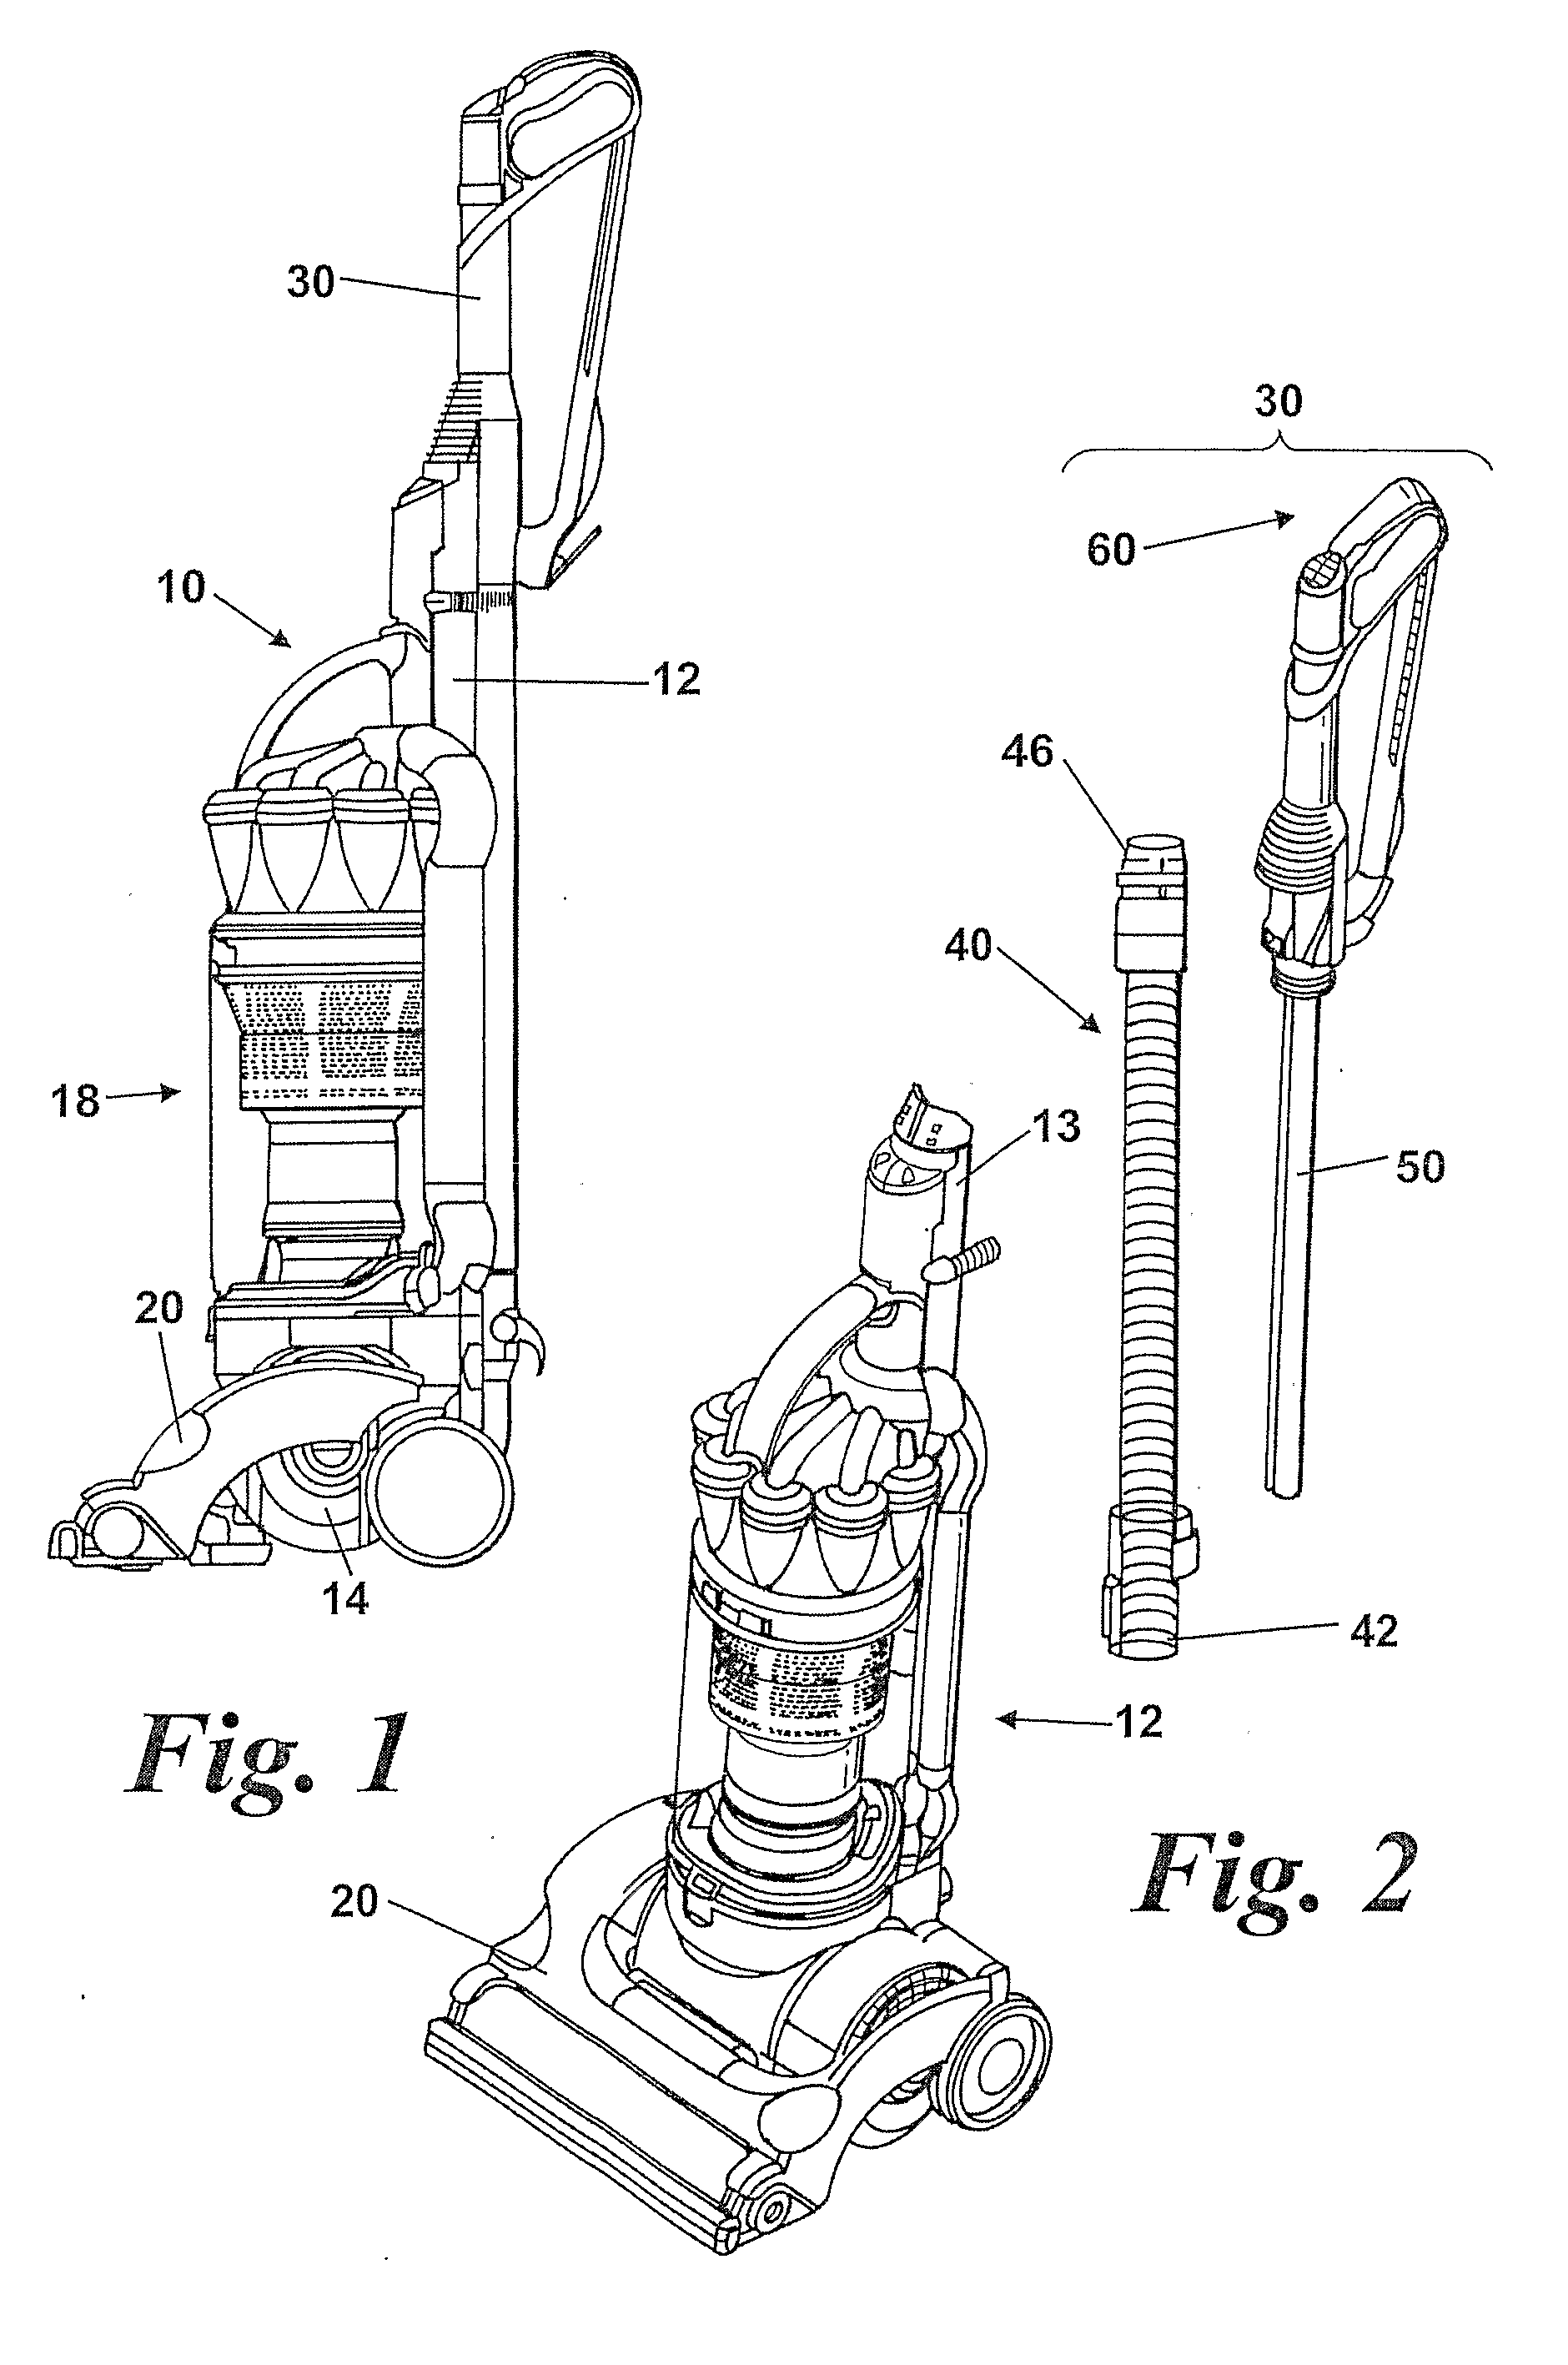 Handle assembly for a cleaning appliance